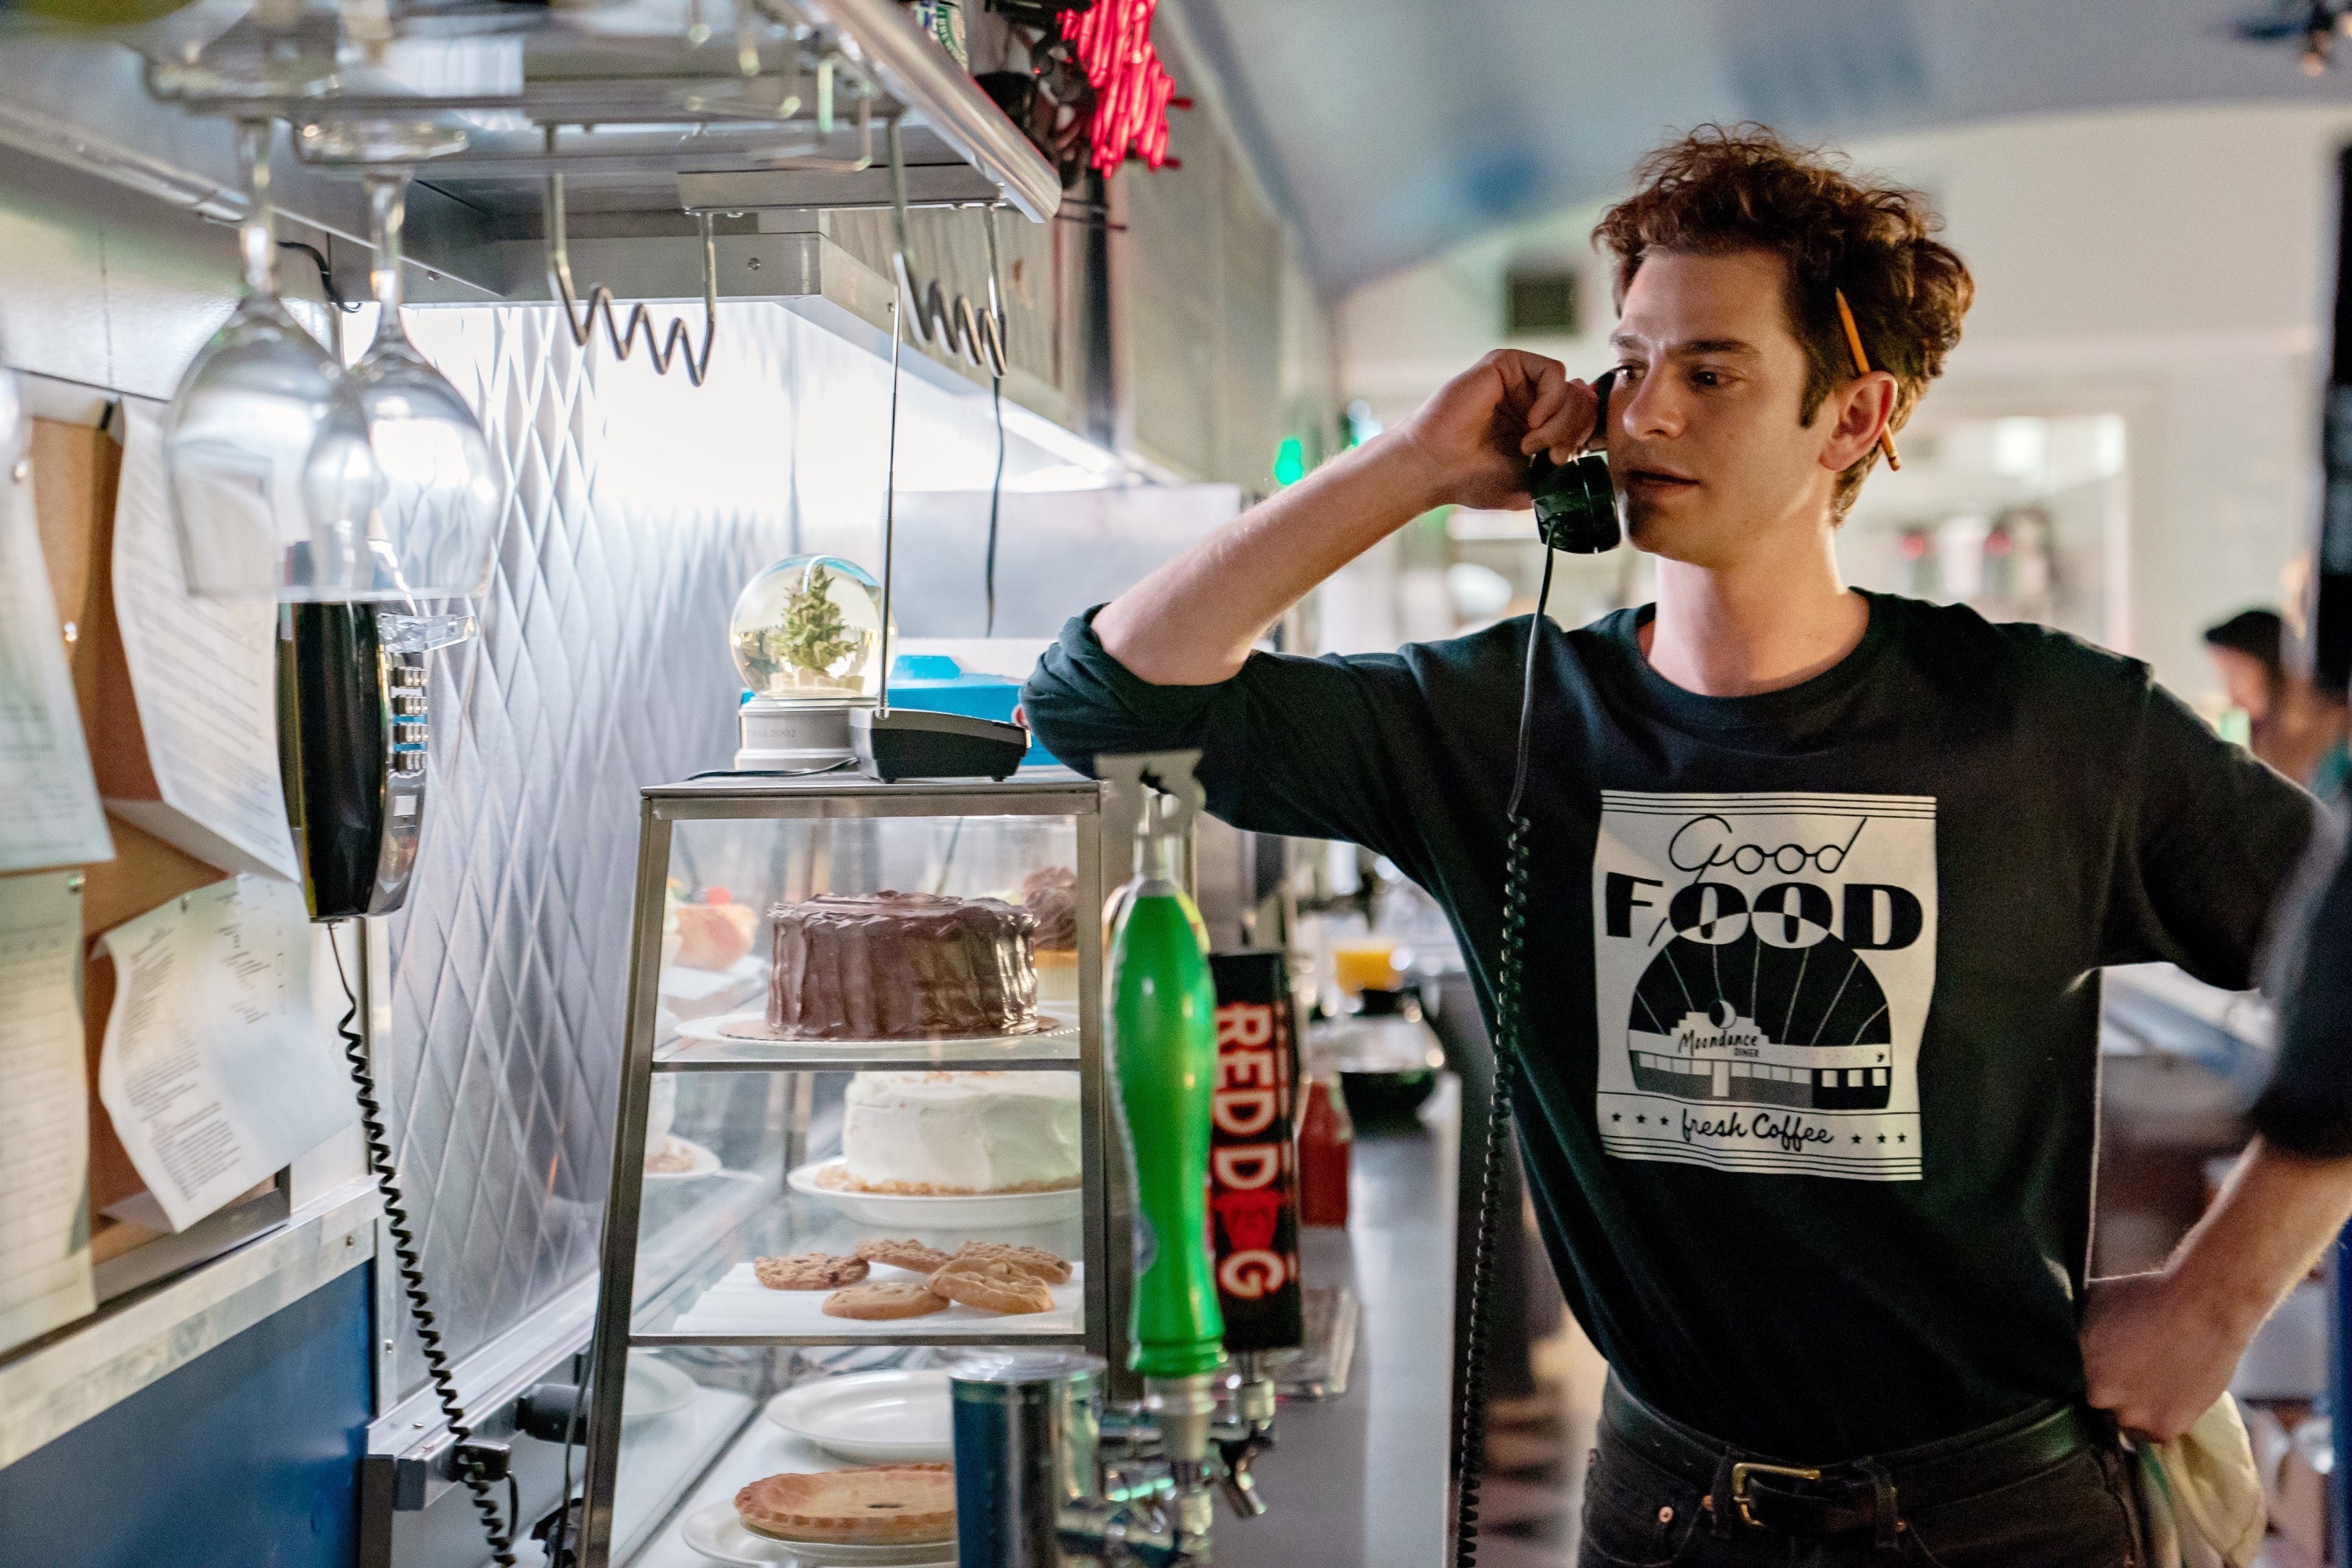 Andrew Garfield talks on the phone in a diner